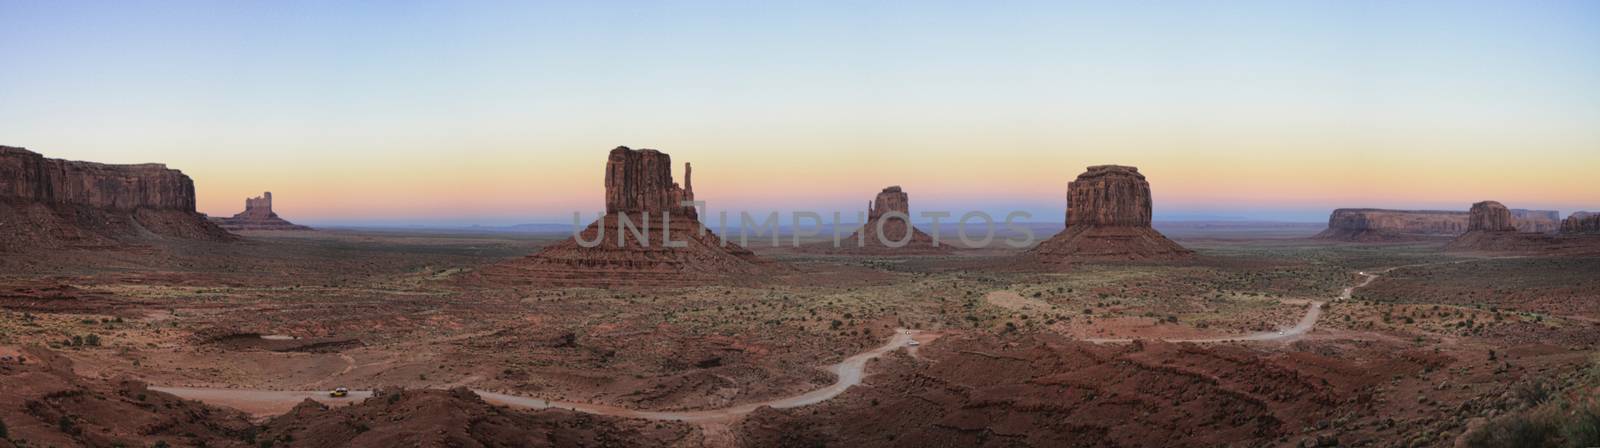 Monument Valley Panoramic view at sunset